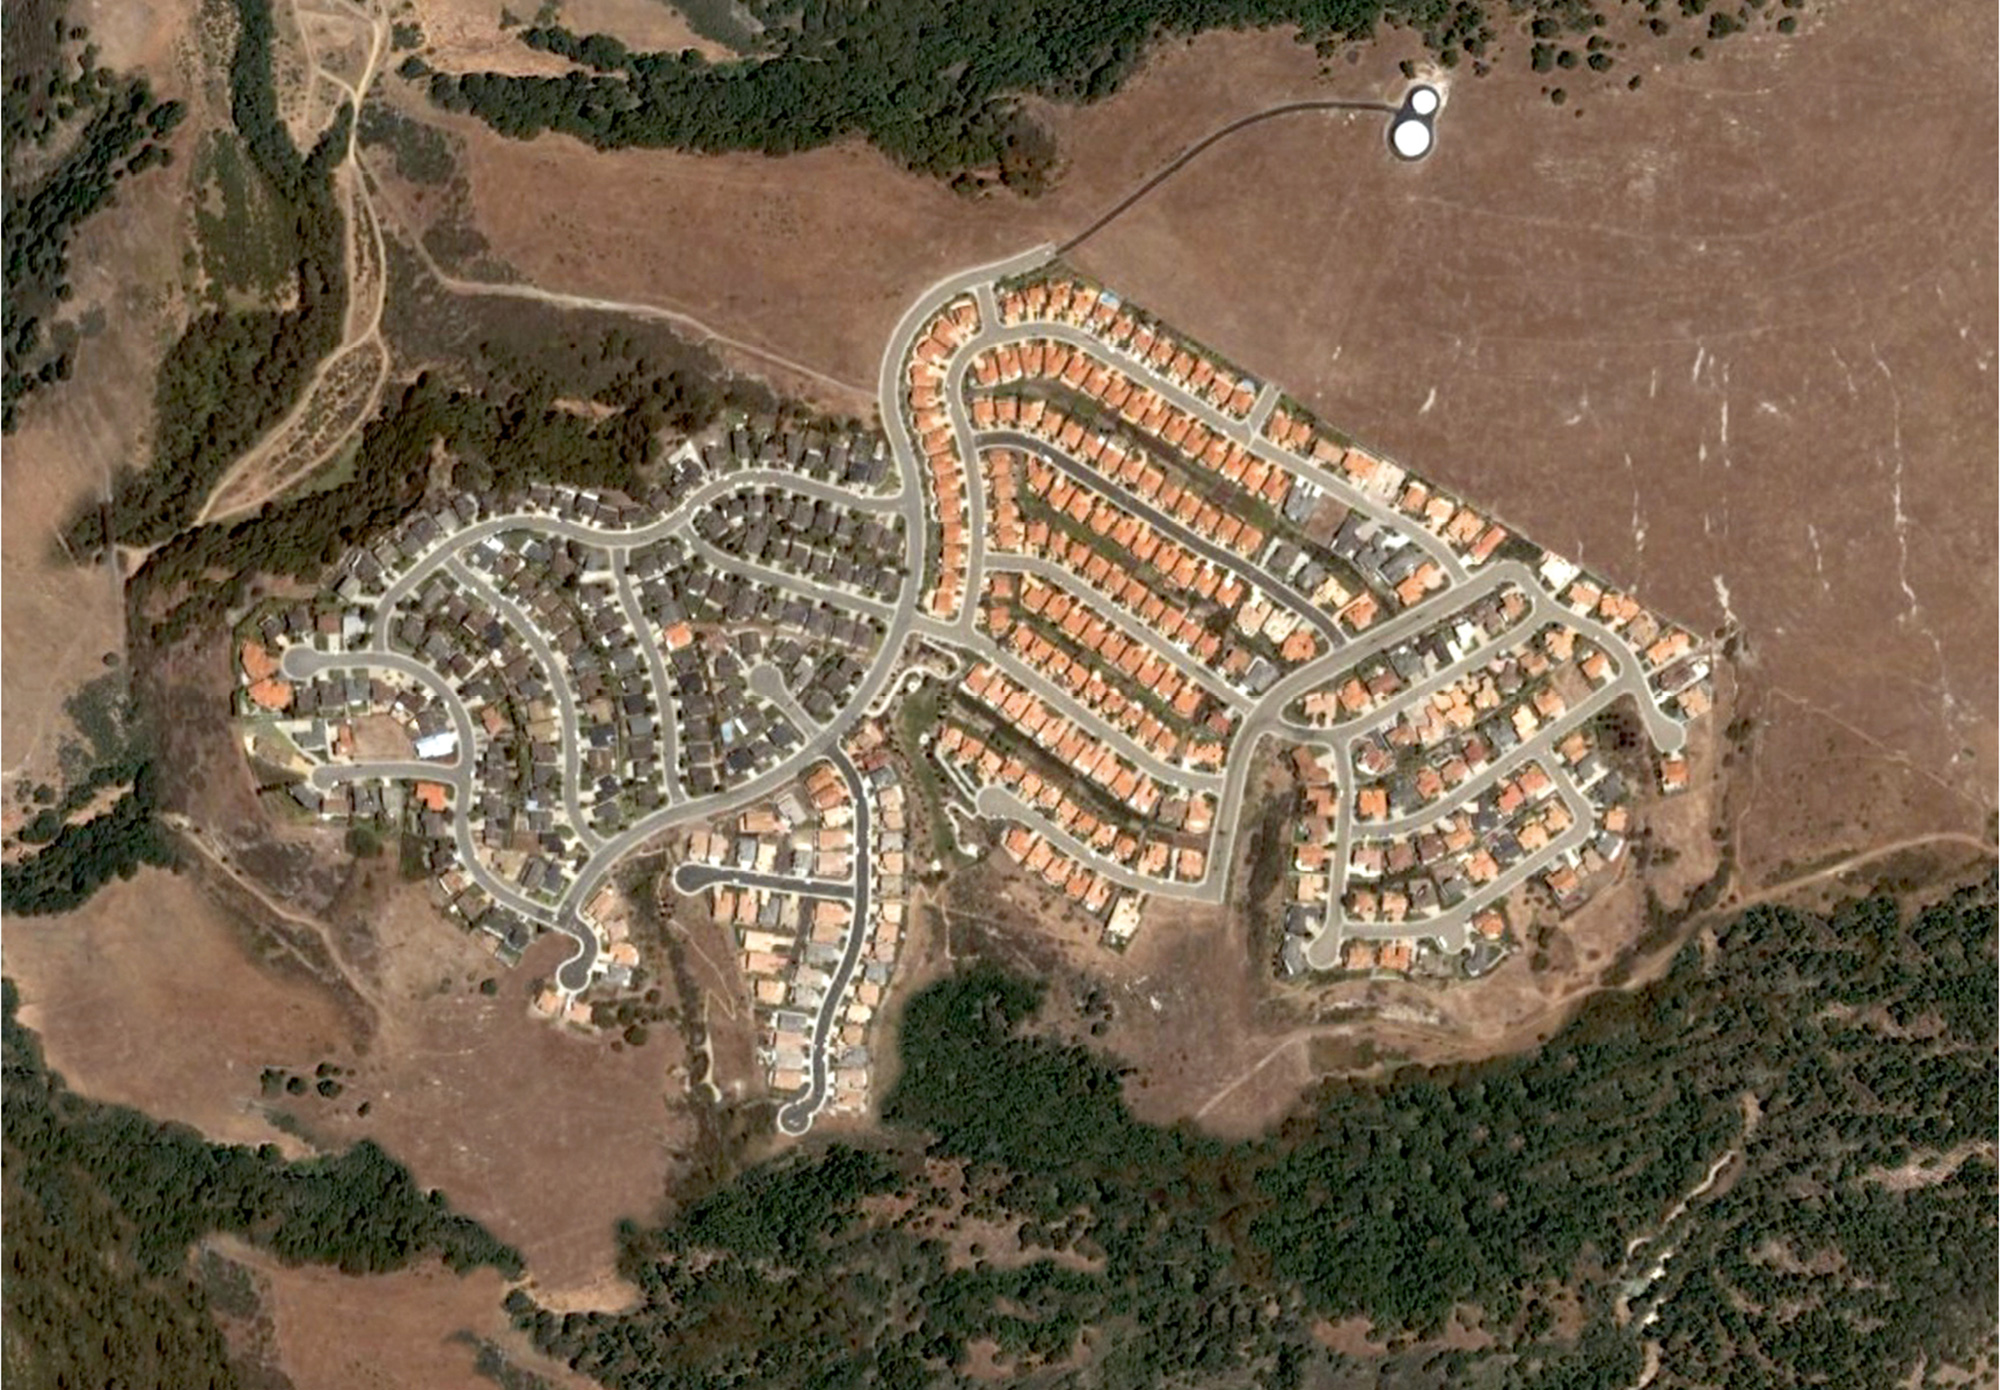 An altered aerial photograph by Jeremy Drummond of a planned housing community in California.